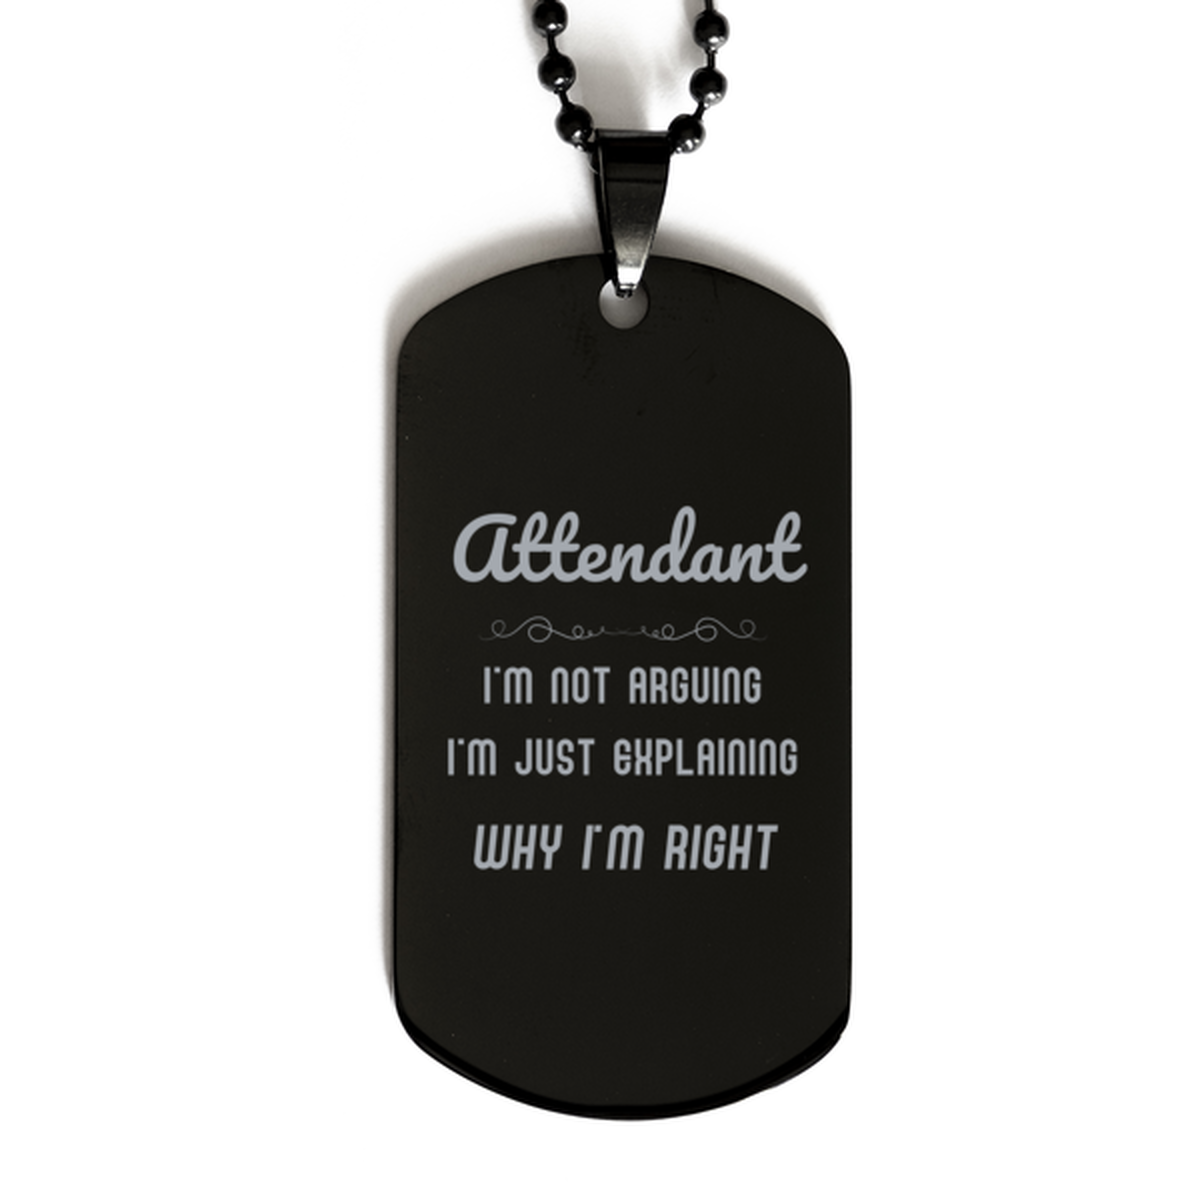 Attendant I'm not Arguing. I'm Just Explaining Why I'm RIGHT Black Dog Tag, Funny Saying Quote Attendant Gifts For Attendant Graduation Birthday Christmas Gifts for Men Women Coworker